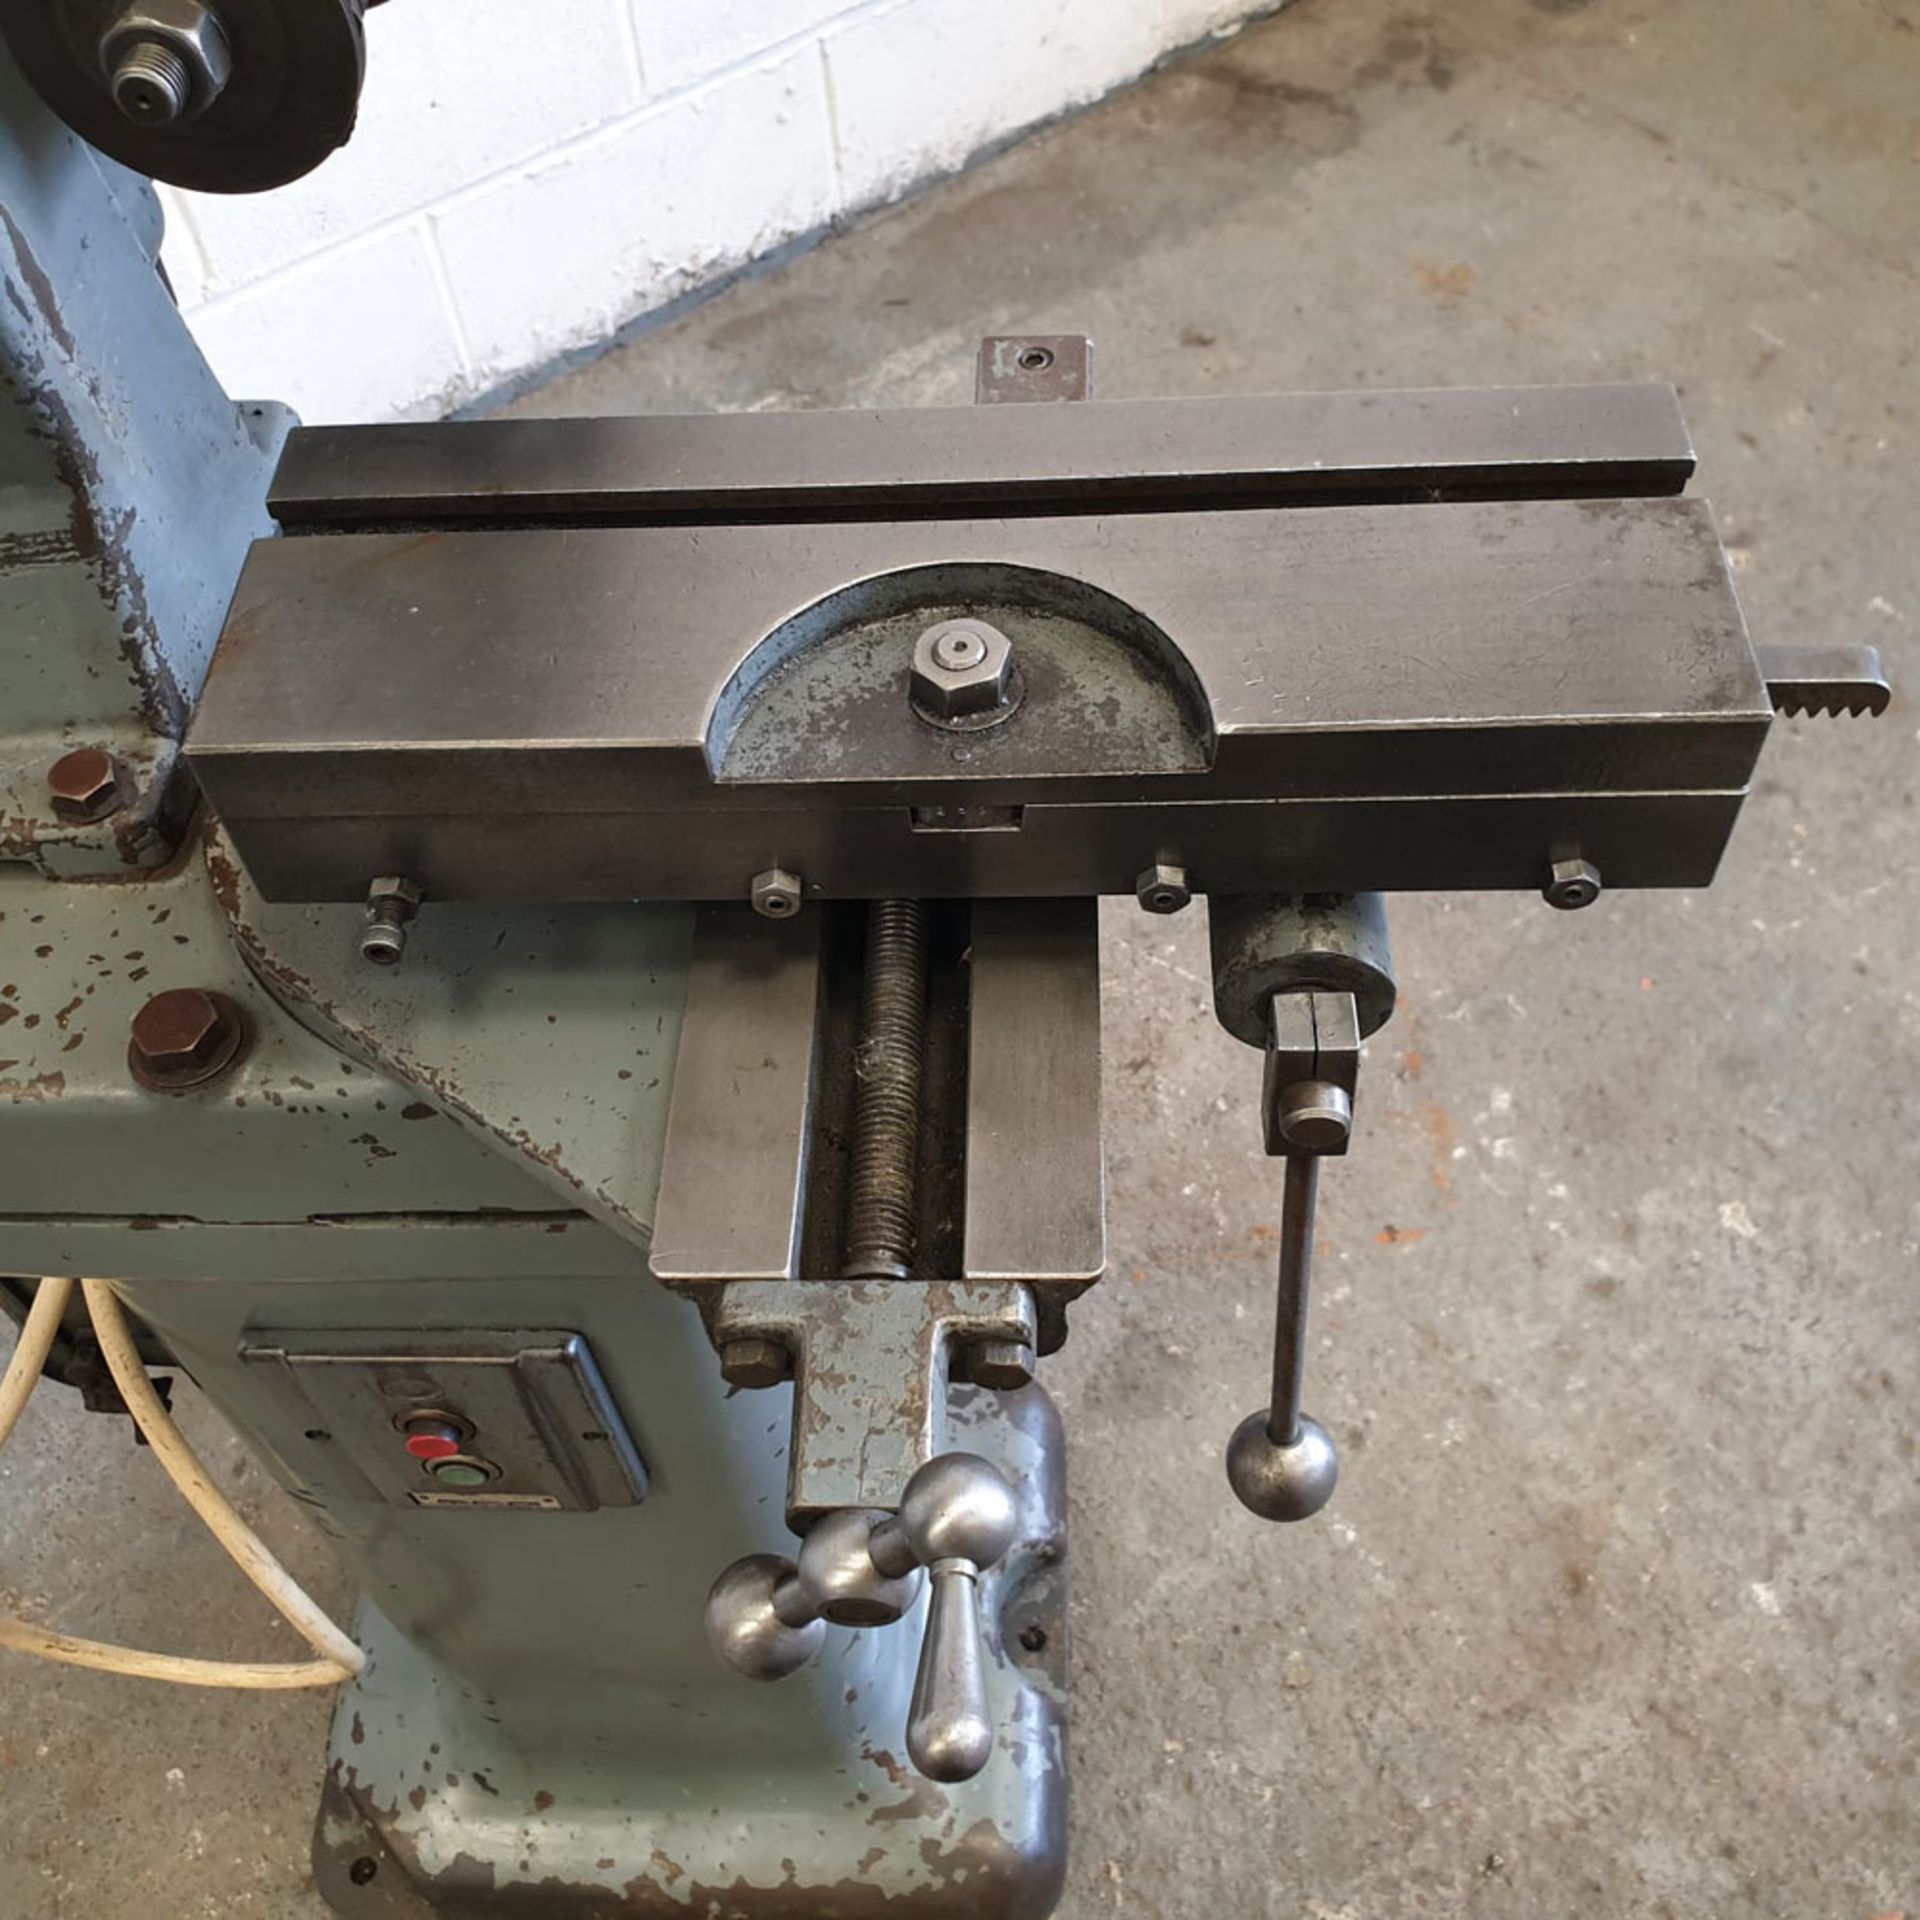 Clarkson MK1 Tool & Cutter Grinding Machine. Capacity: 12" x 6" Diameter. Table Size: 13" x 4 1/4". - Image 3 of 4